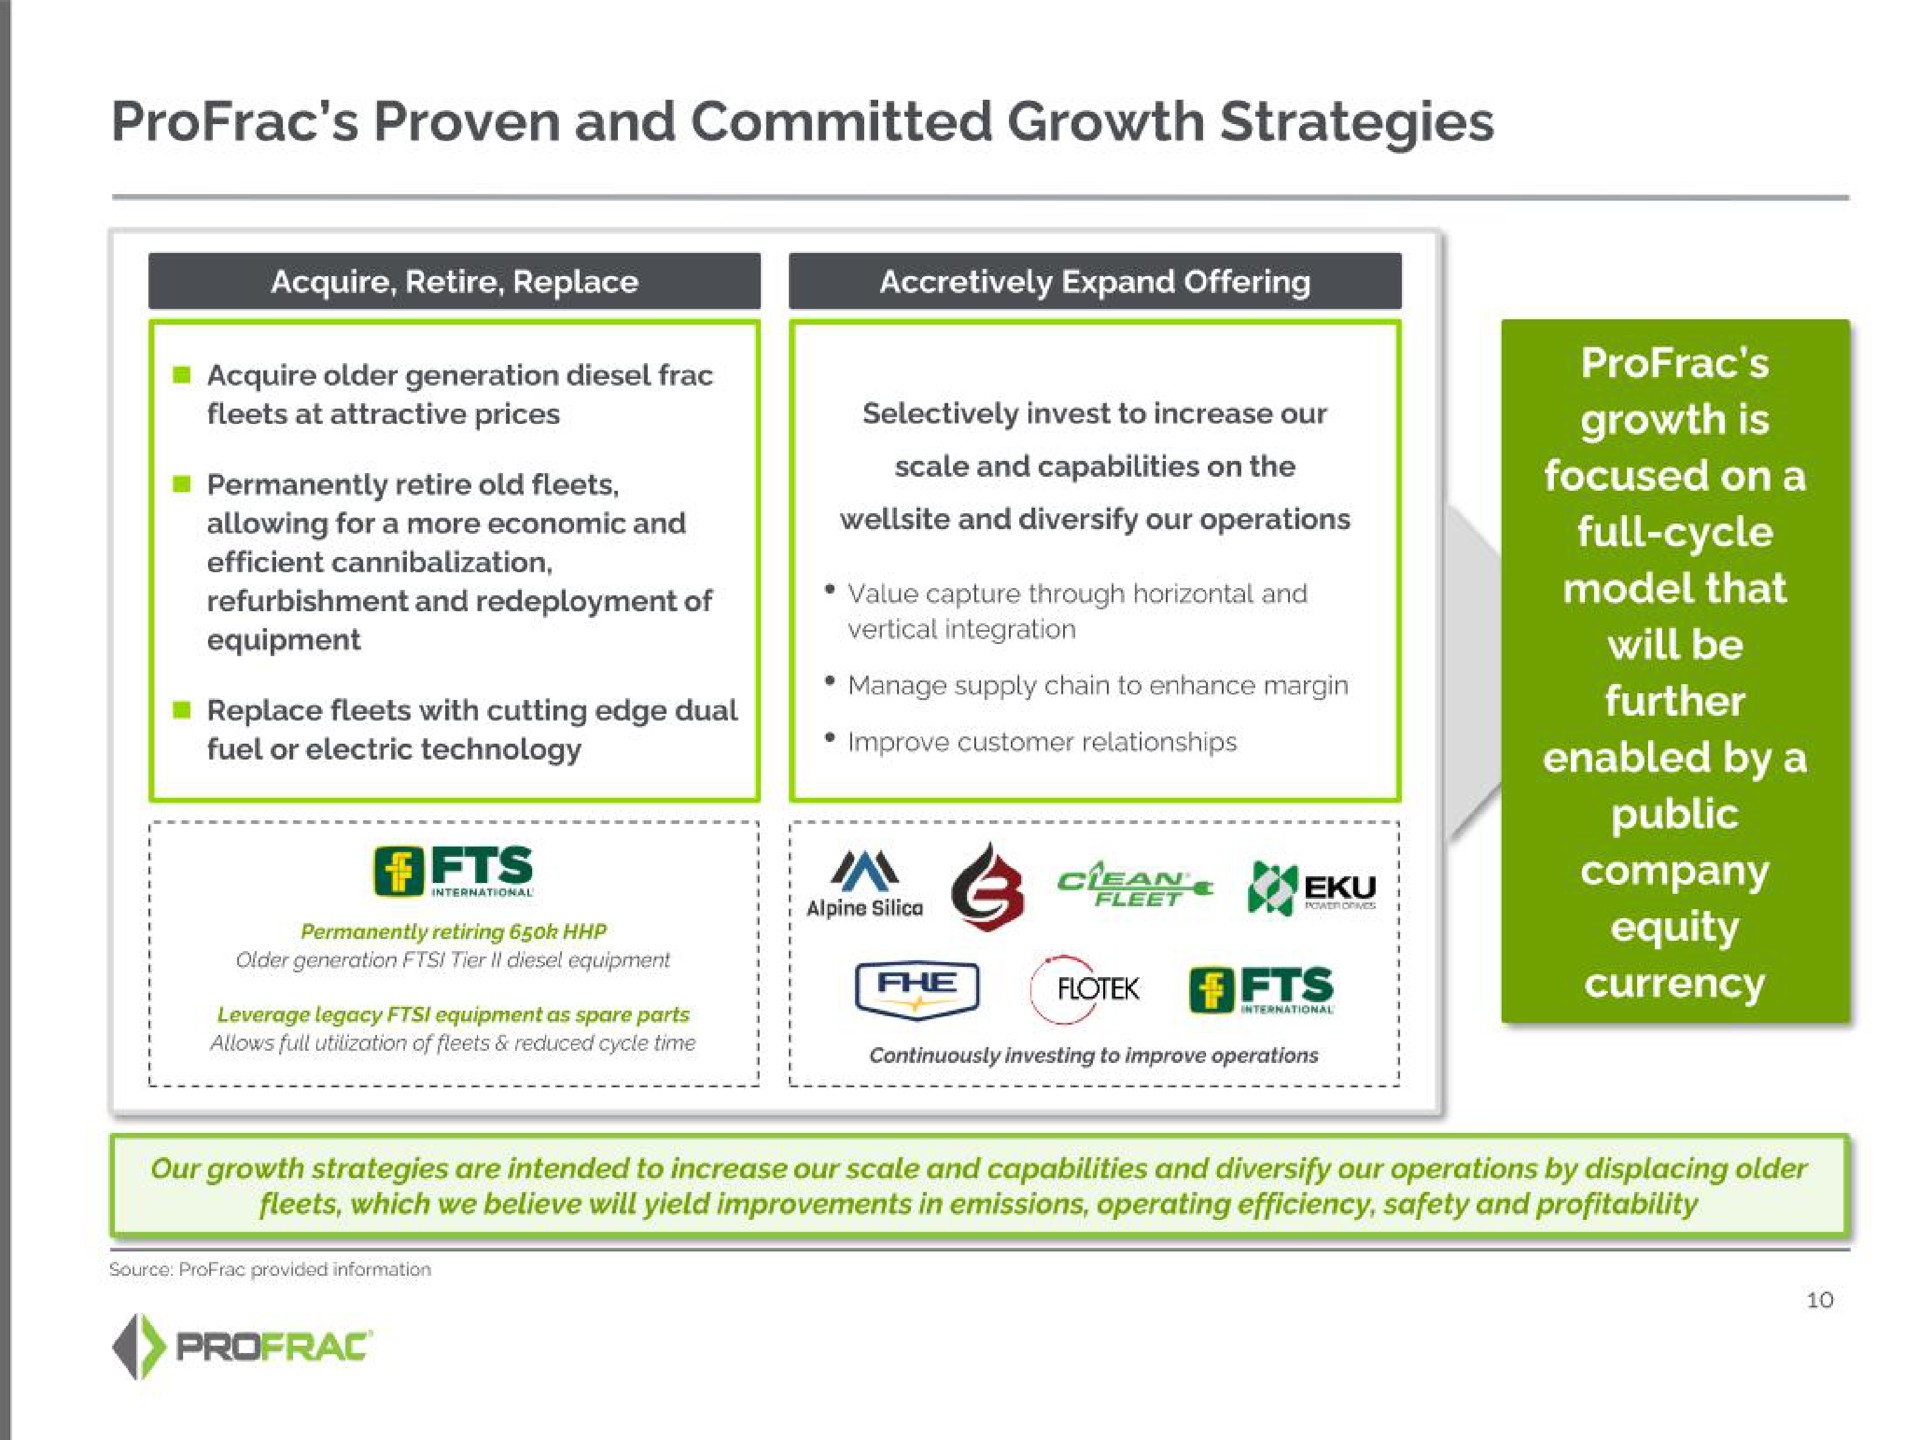 proven and committed growth strategies fits growth is full cycle model that further enabled public company equity currency | Profrac